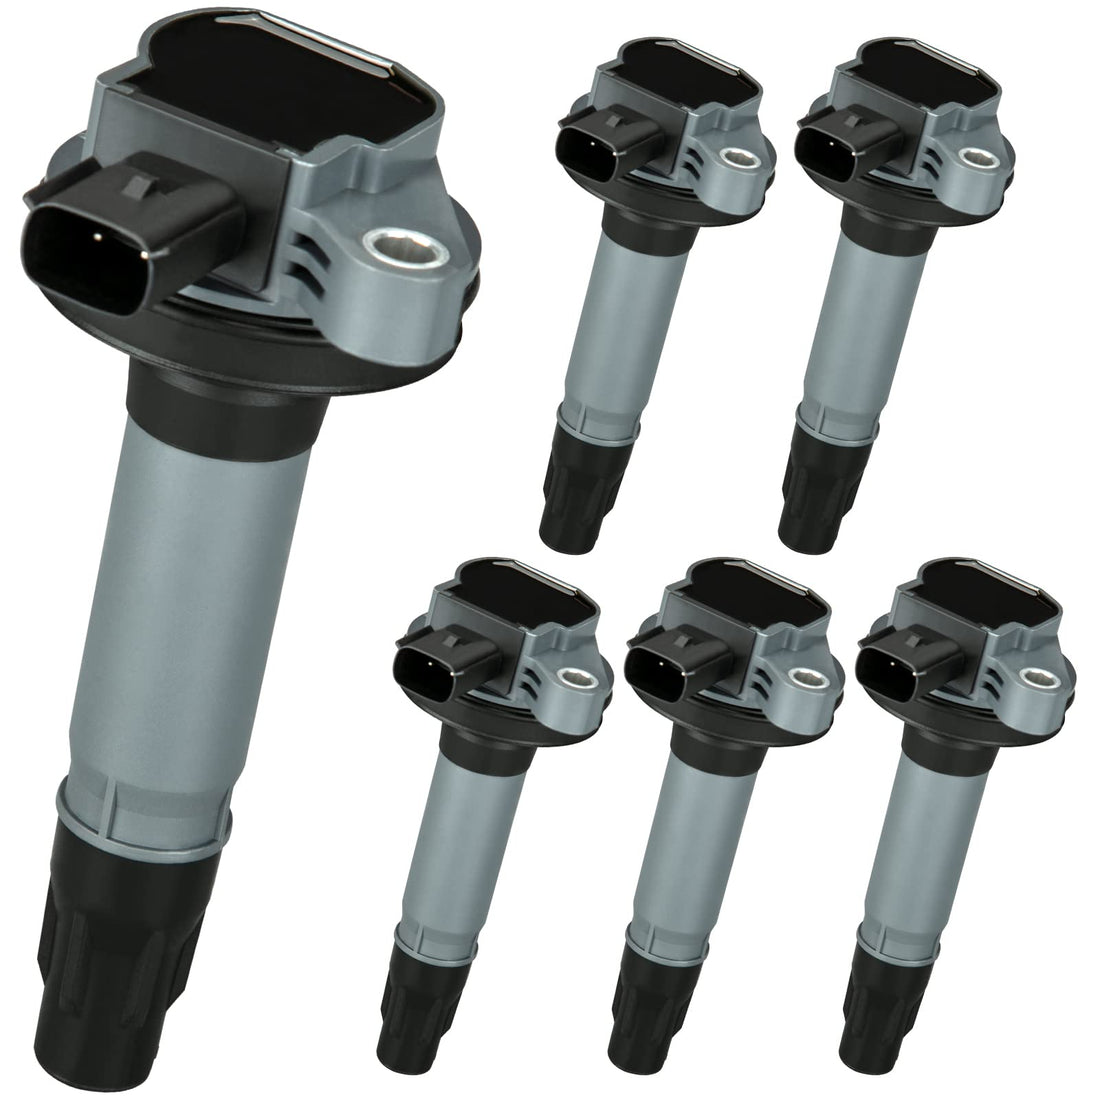 6 Ignition Coil Packs for Ford, Mercury, Mazda & Lincoln